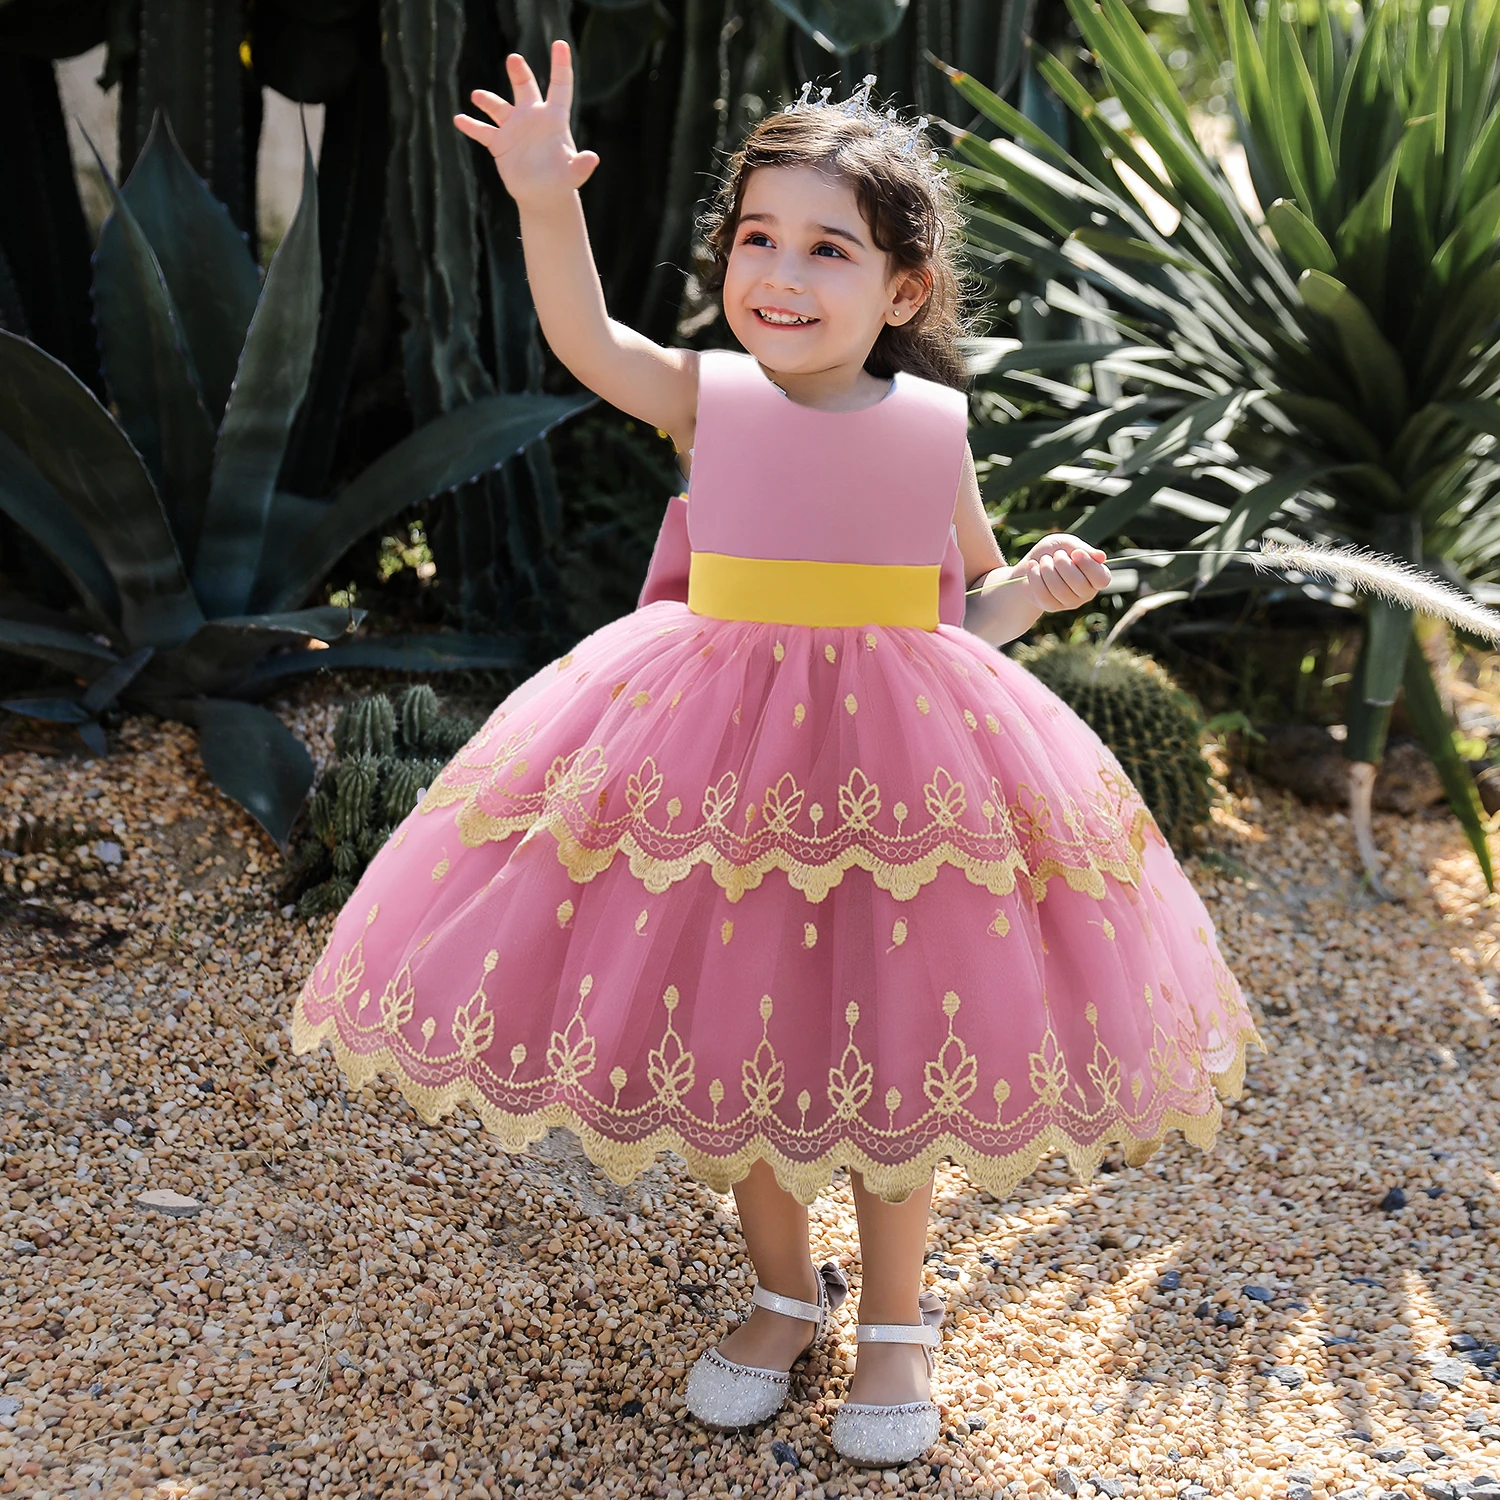 15 Cute Flower Girl Dresses To Choose From